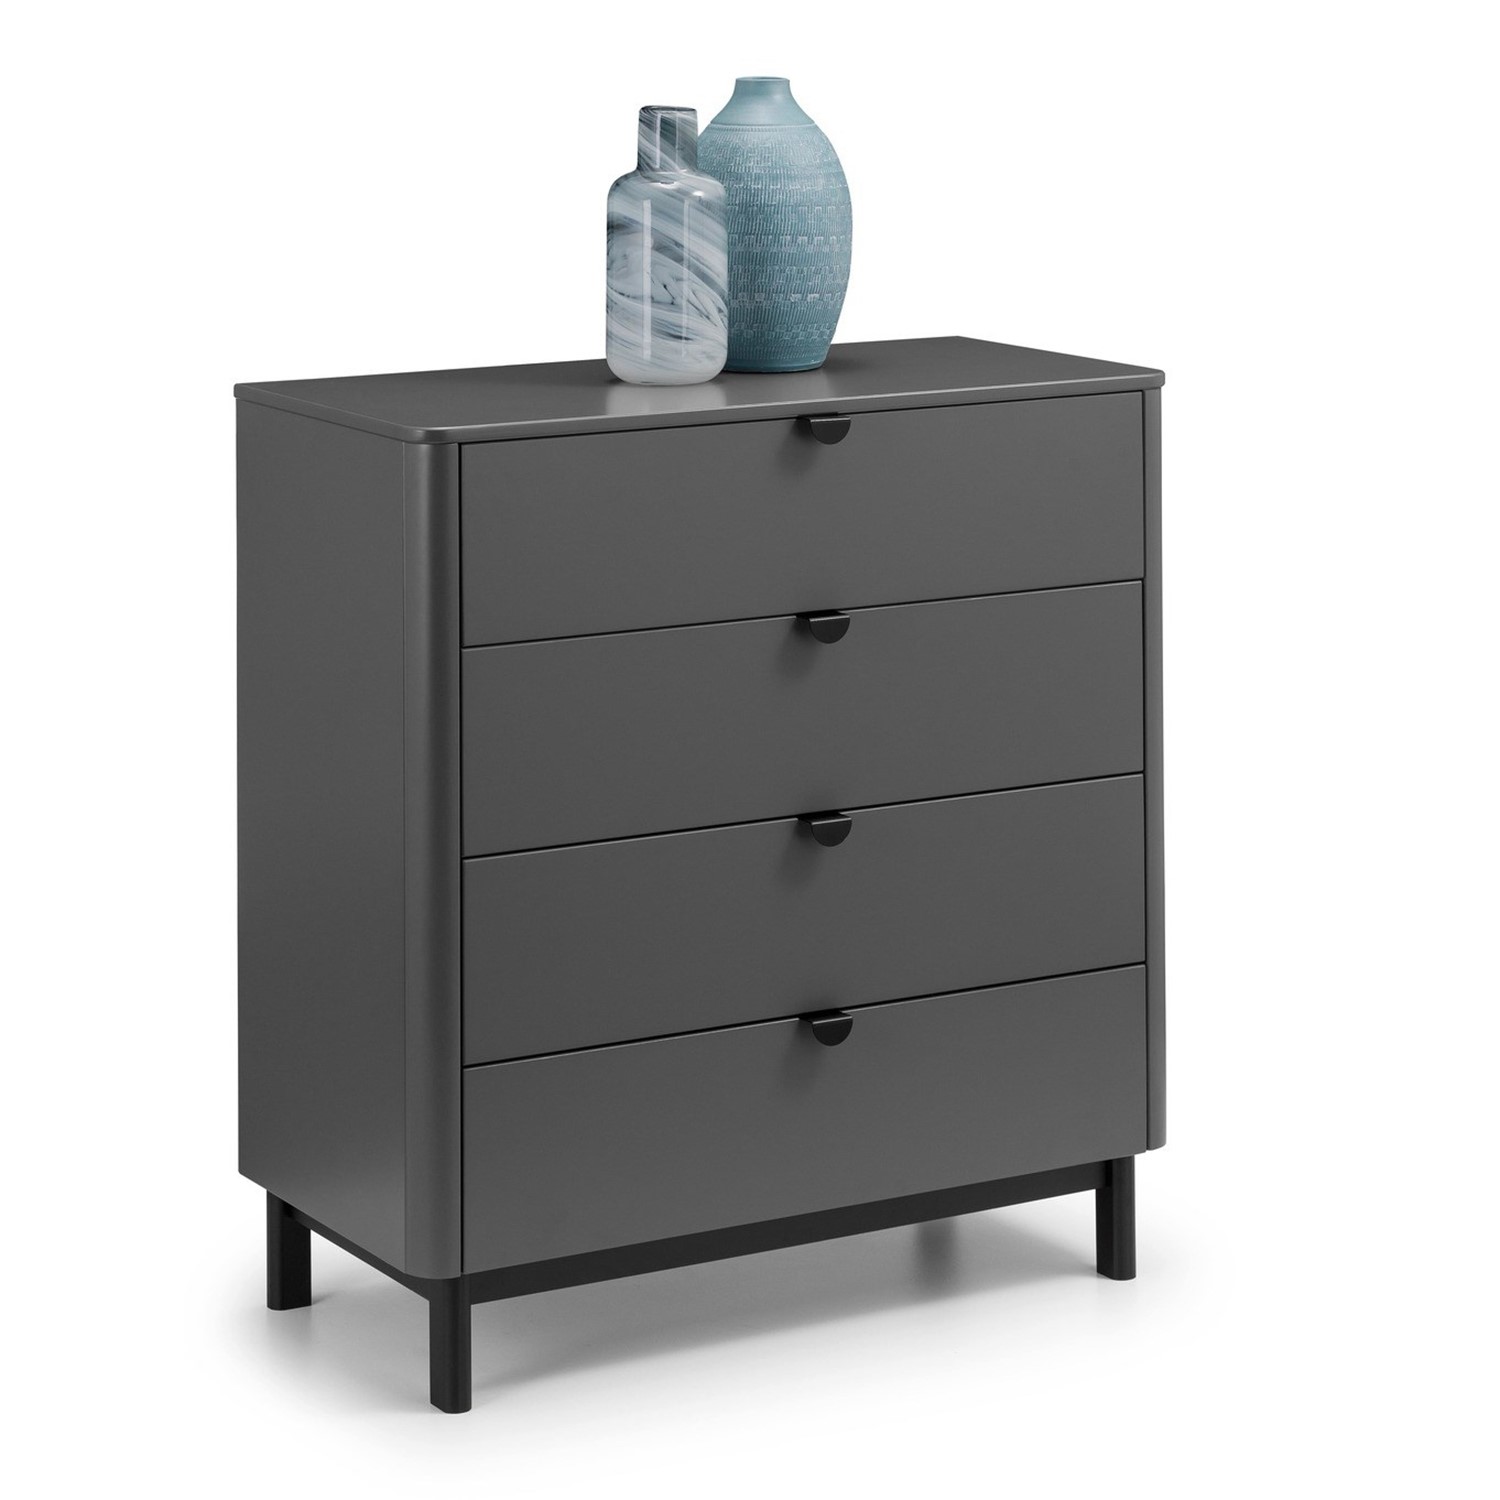 Read more about Dark grey modern chest of 4 drawers with legs chloe julian bowen